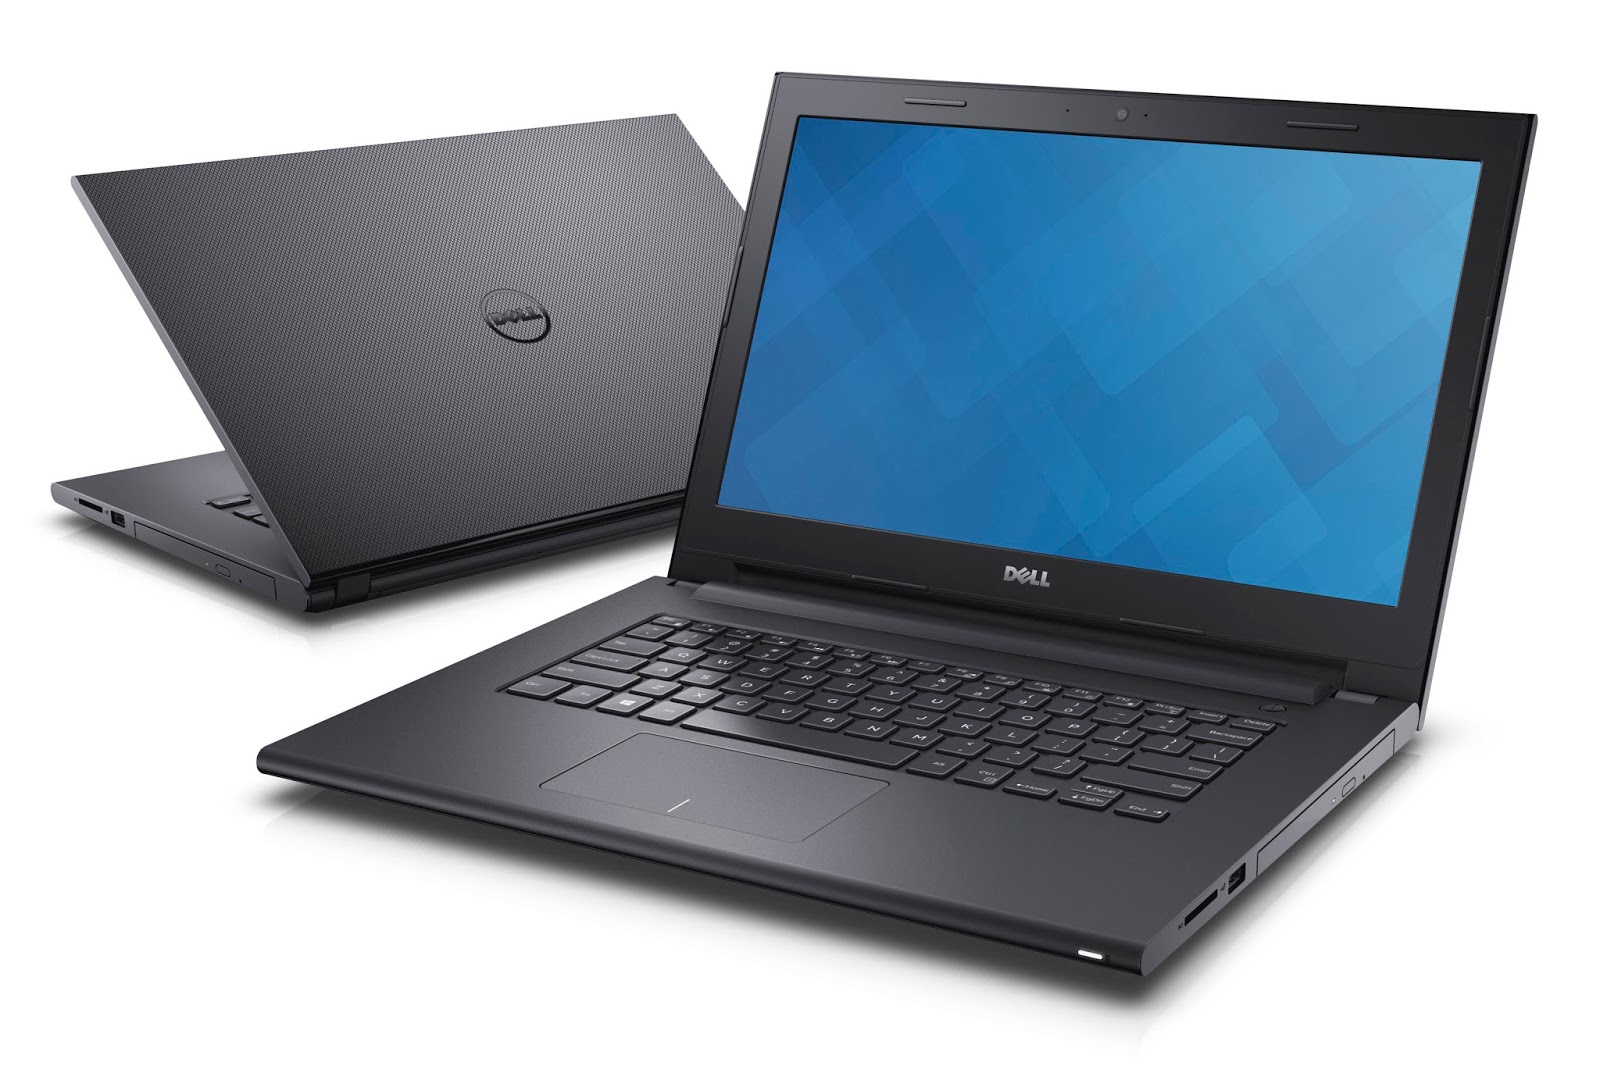 Dell Pp21l Drivers Free Download